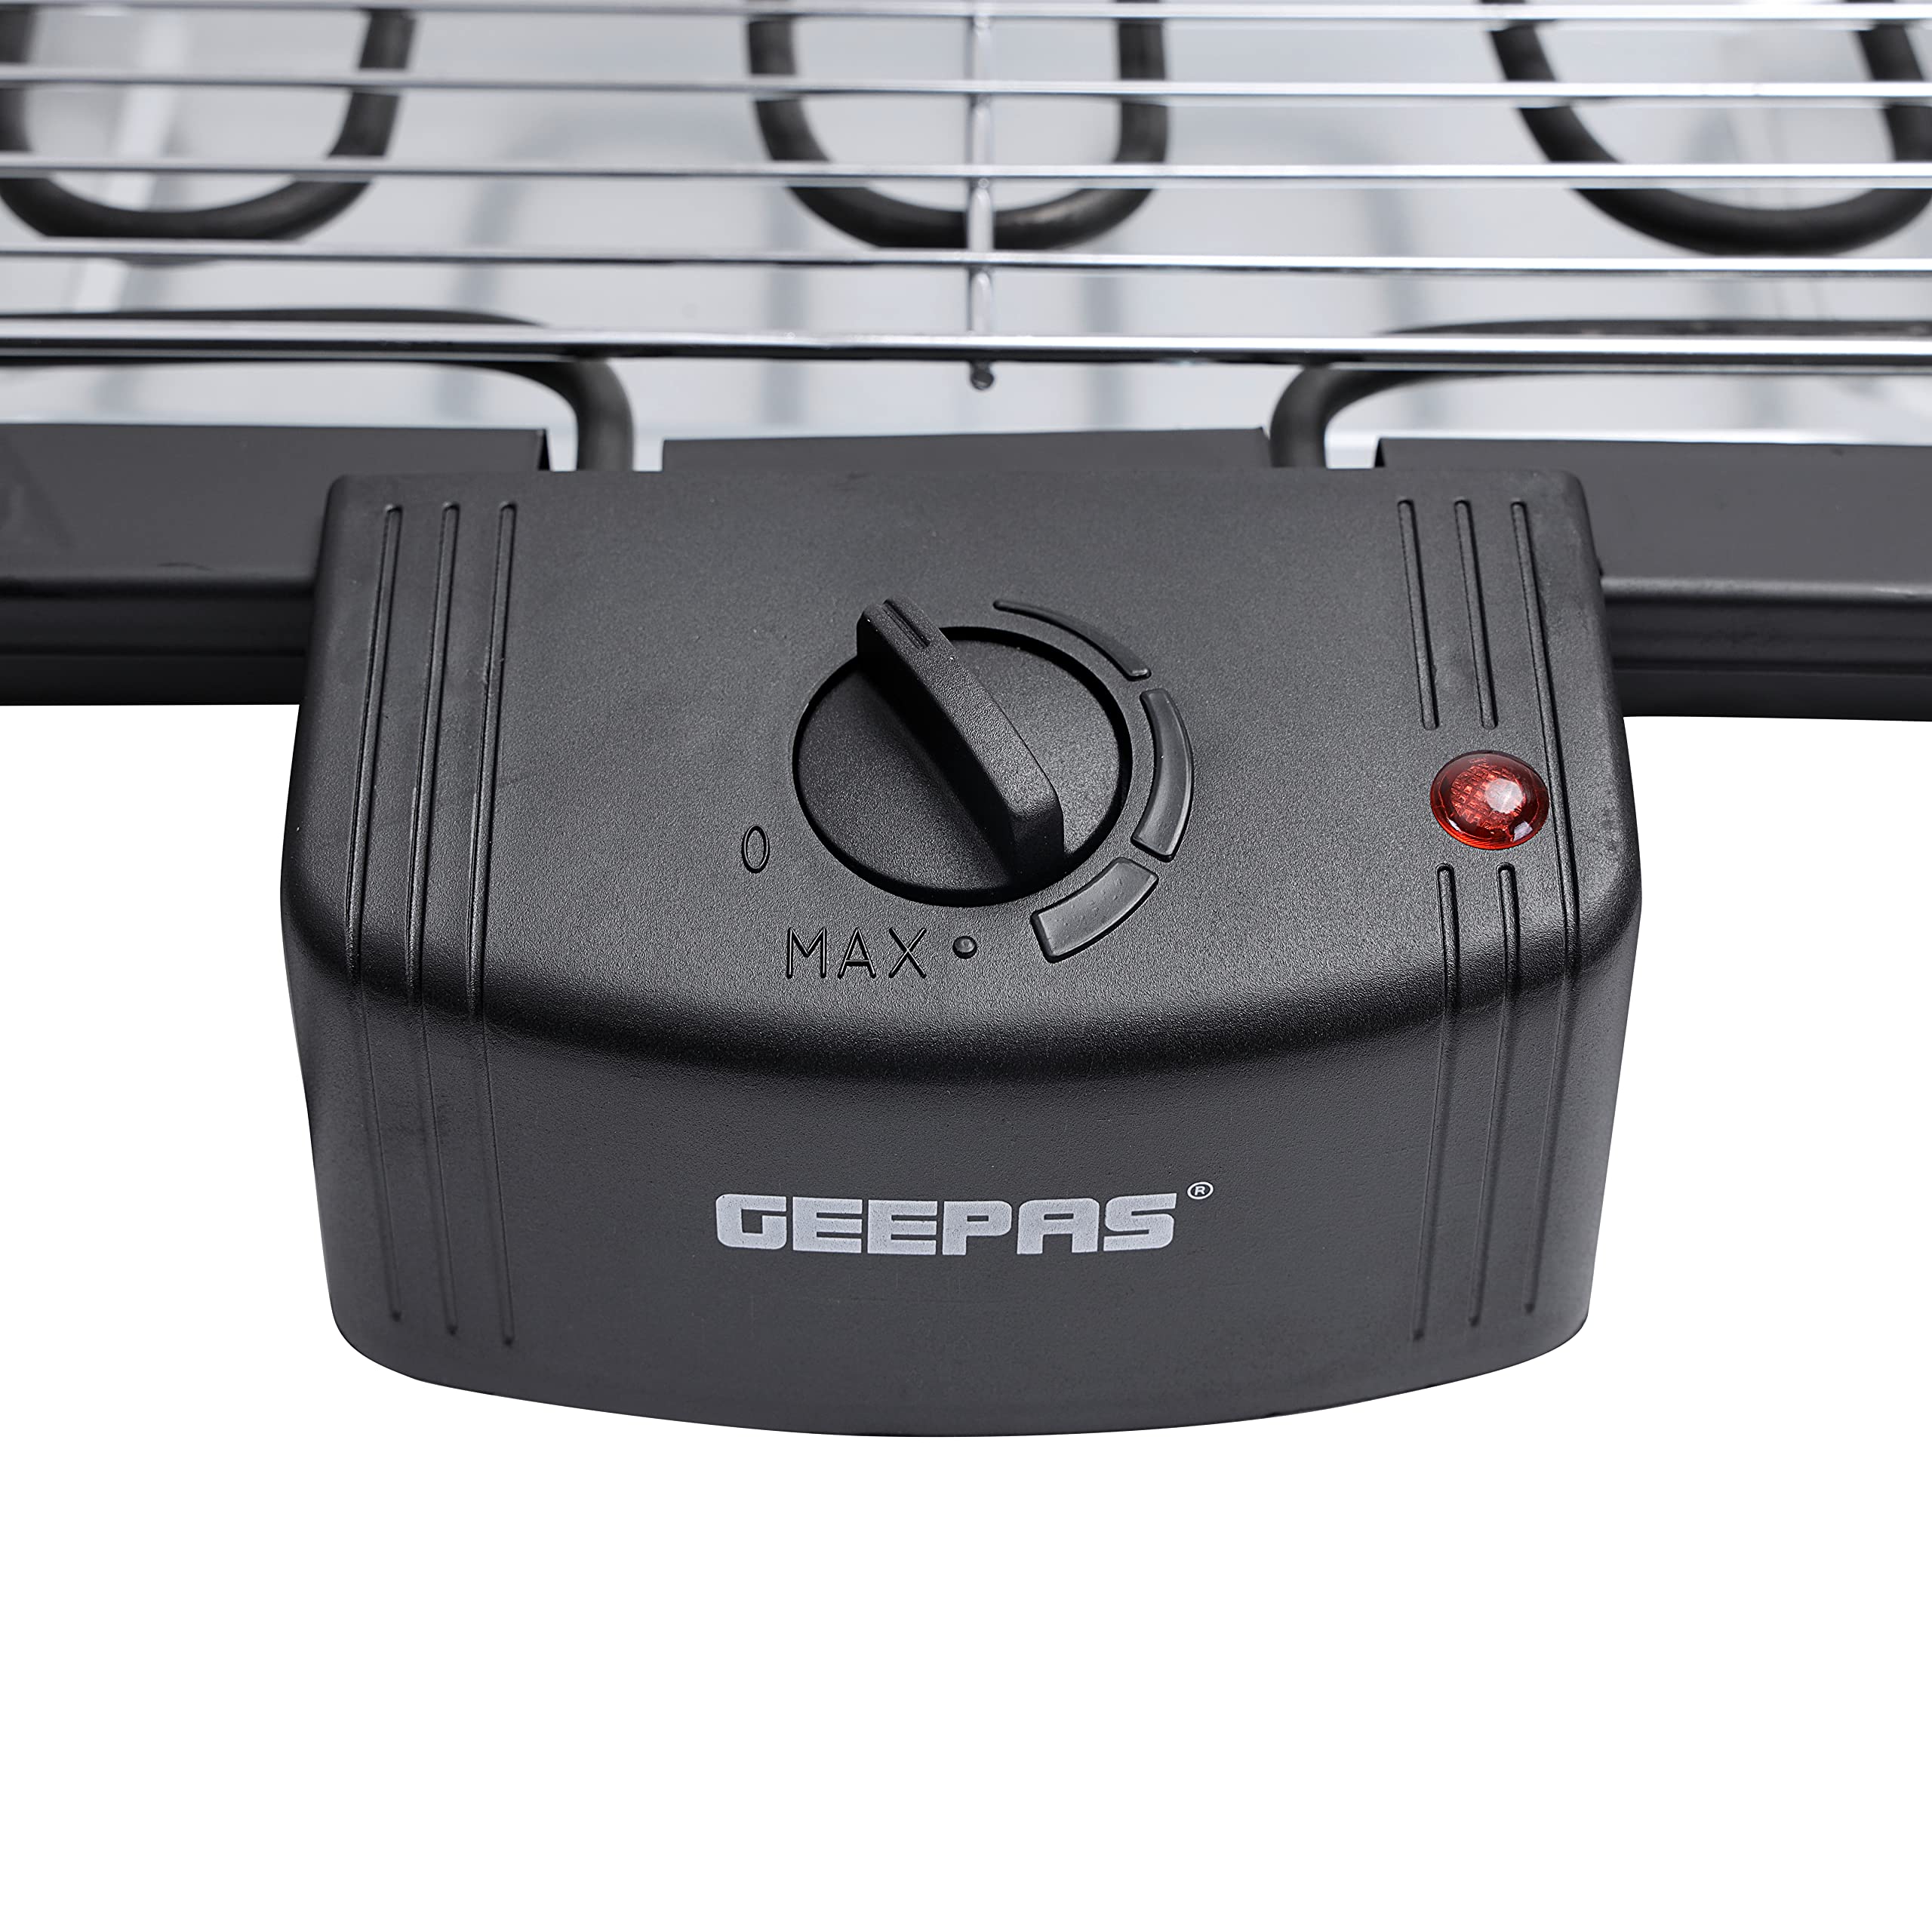 Geepas 2000W Electric Barbecue Grill - Table Grill, Auto-Thermostat Control with Overheat Protection - Space Saving, Detachable Heating Element - 1 Years Warranty